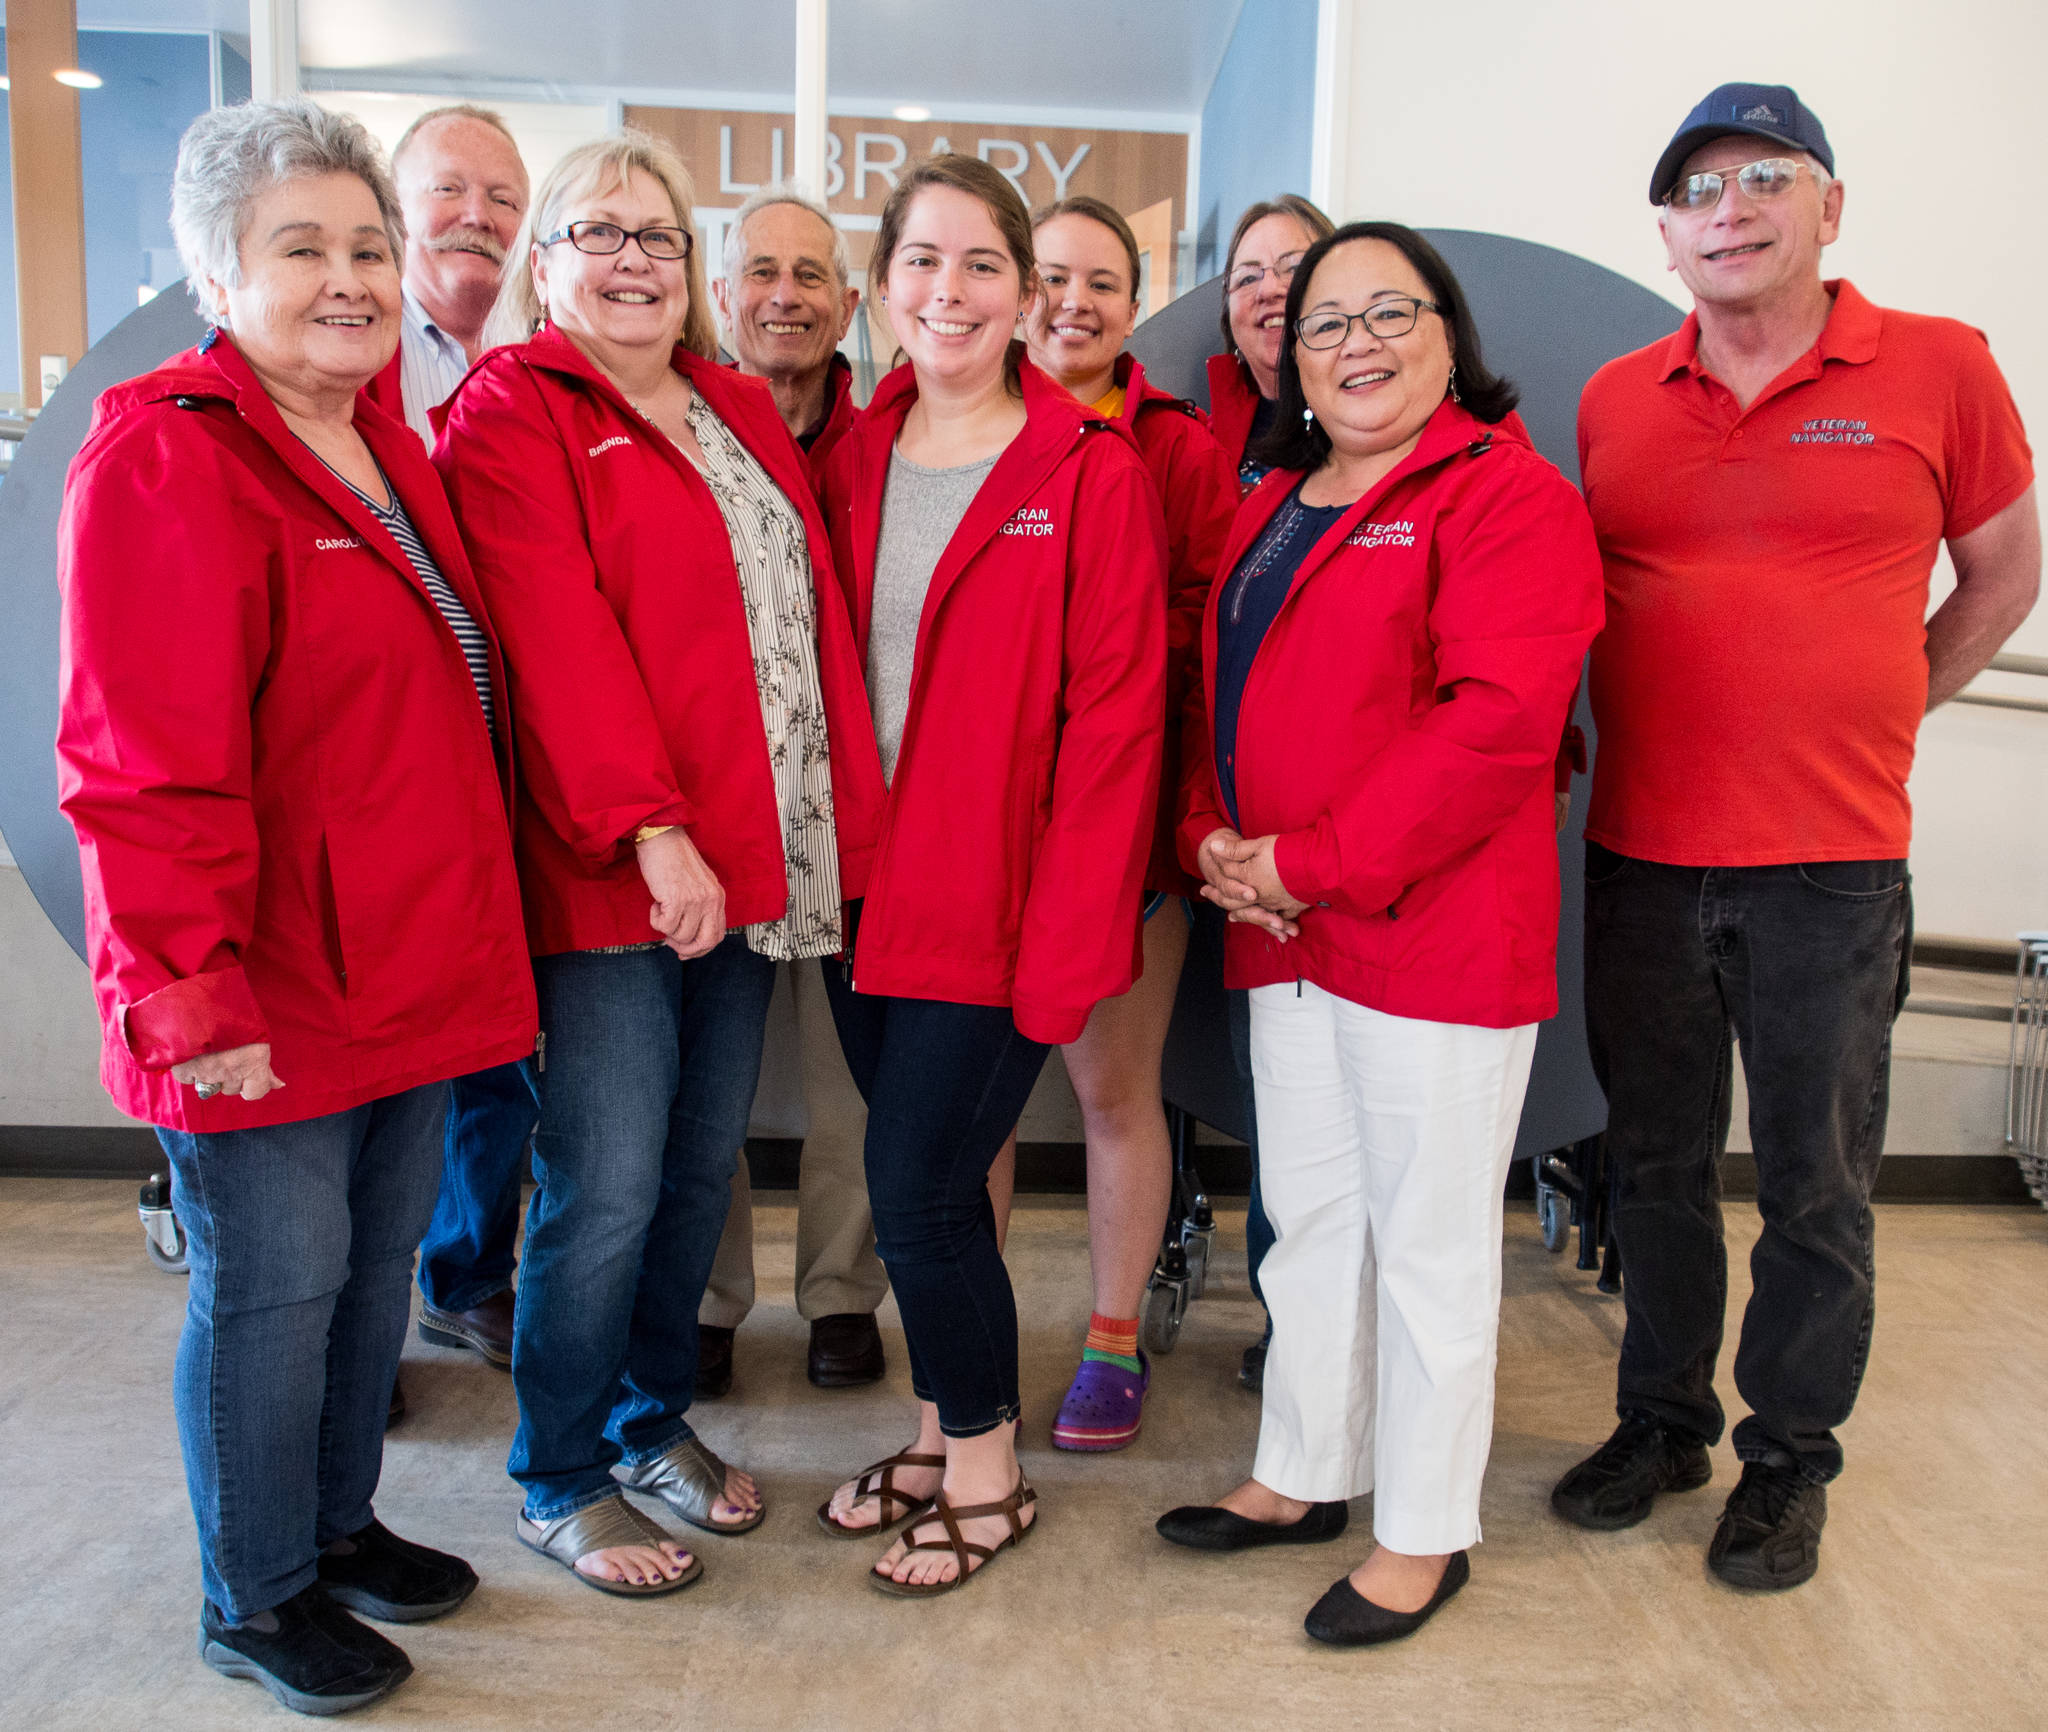 Some of the more than 12 members of the Veteran Navigator Program team that came to Orcas on June 19.